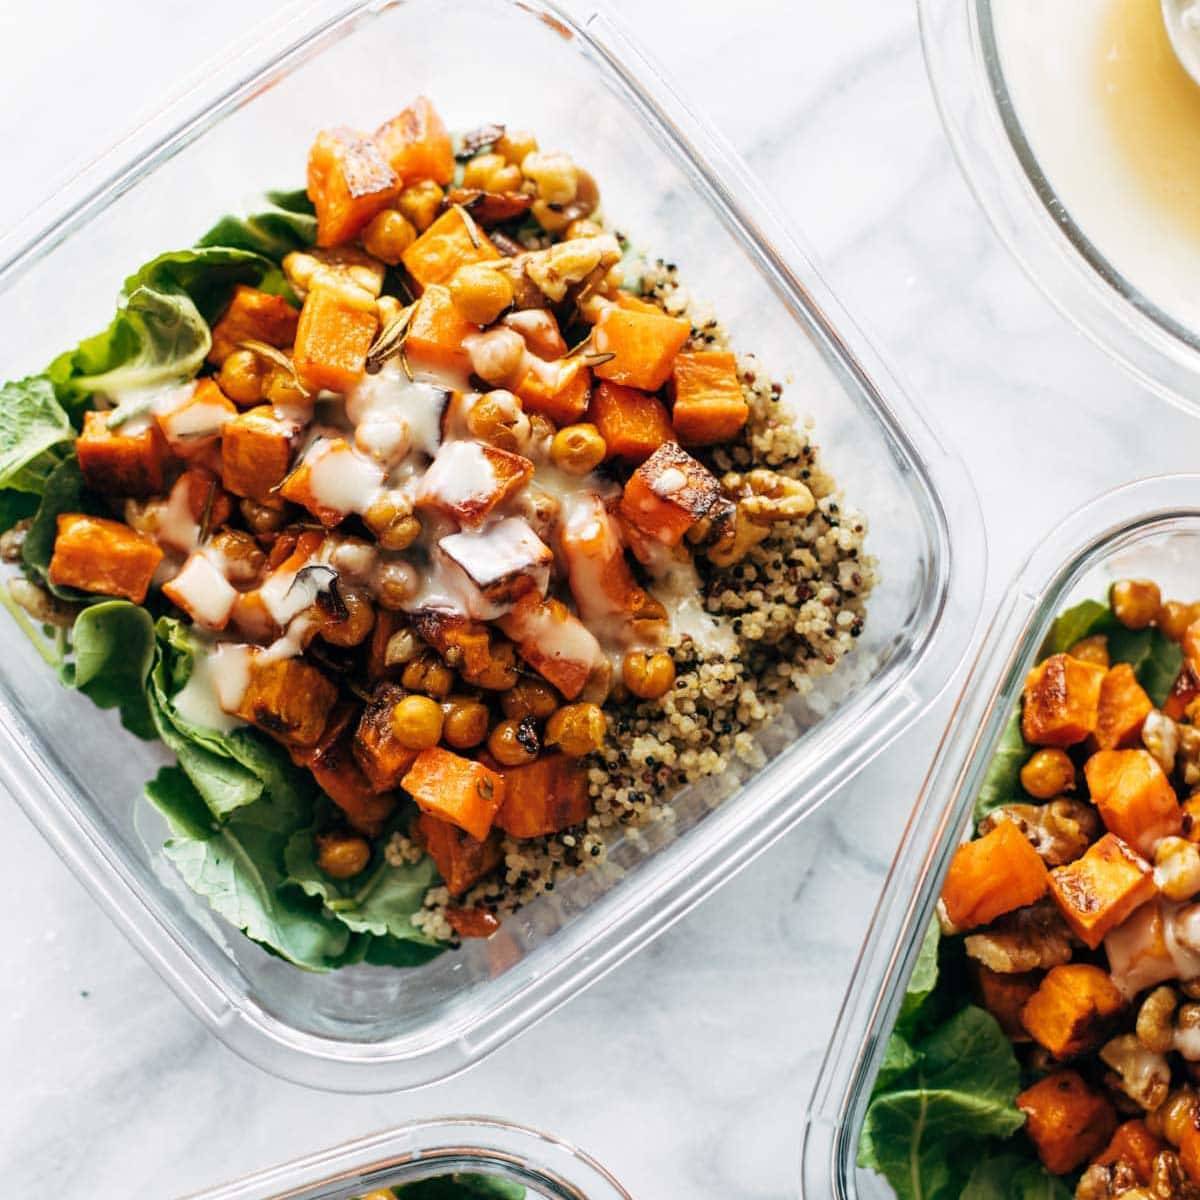 Sweet potato on a bed of greens and quinoa in a rectangular glass salad bowl.